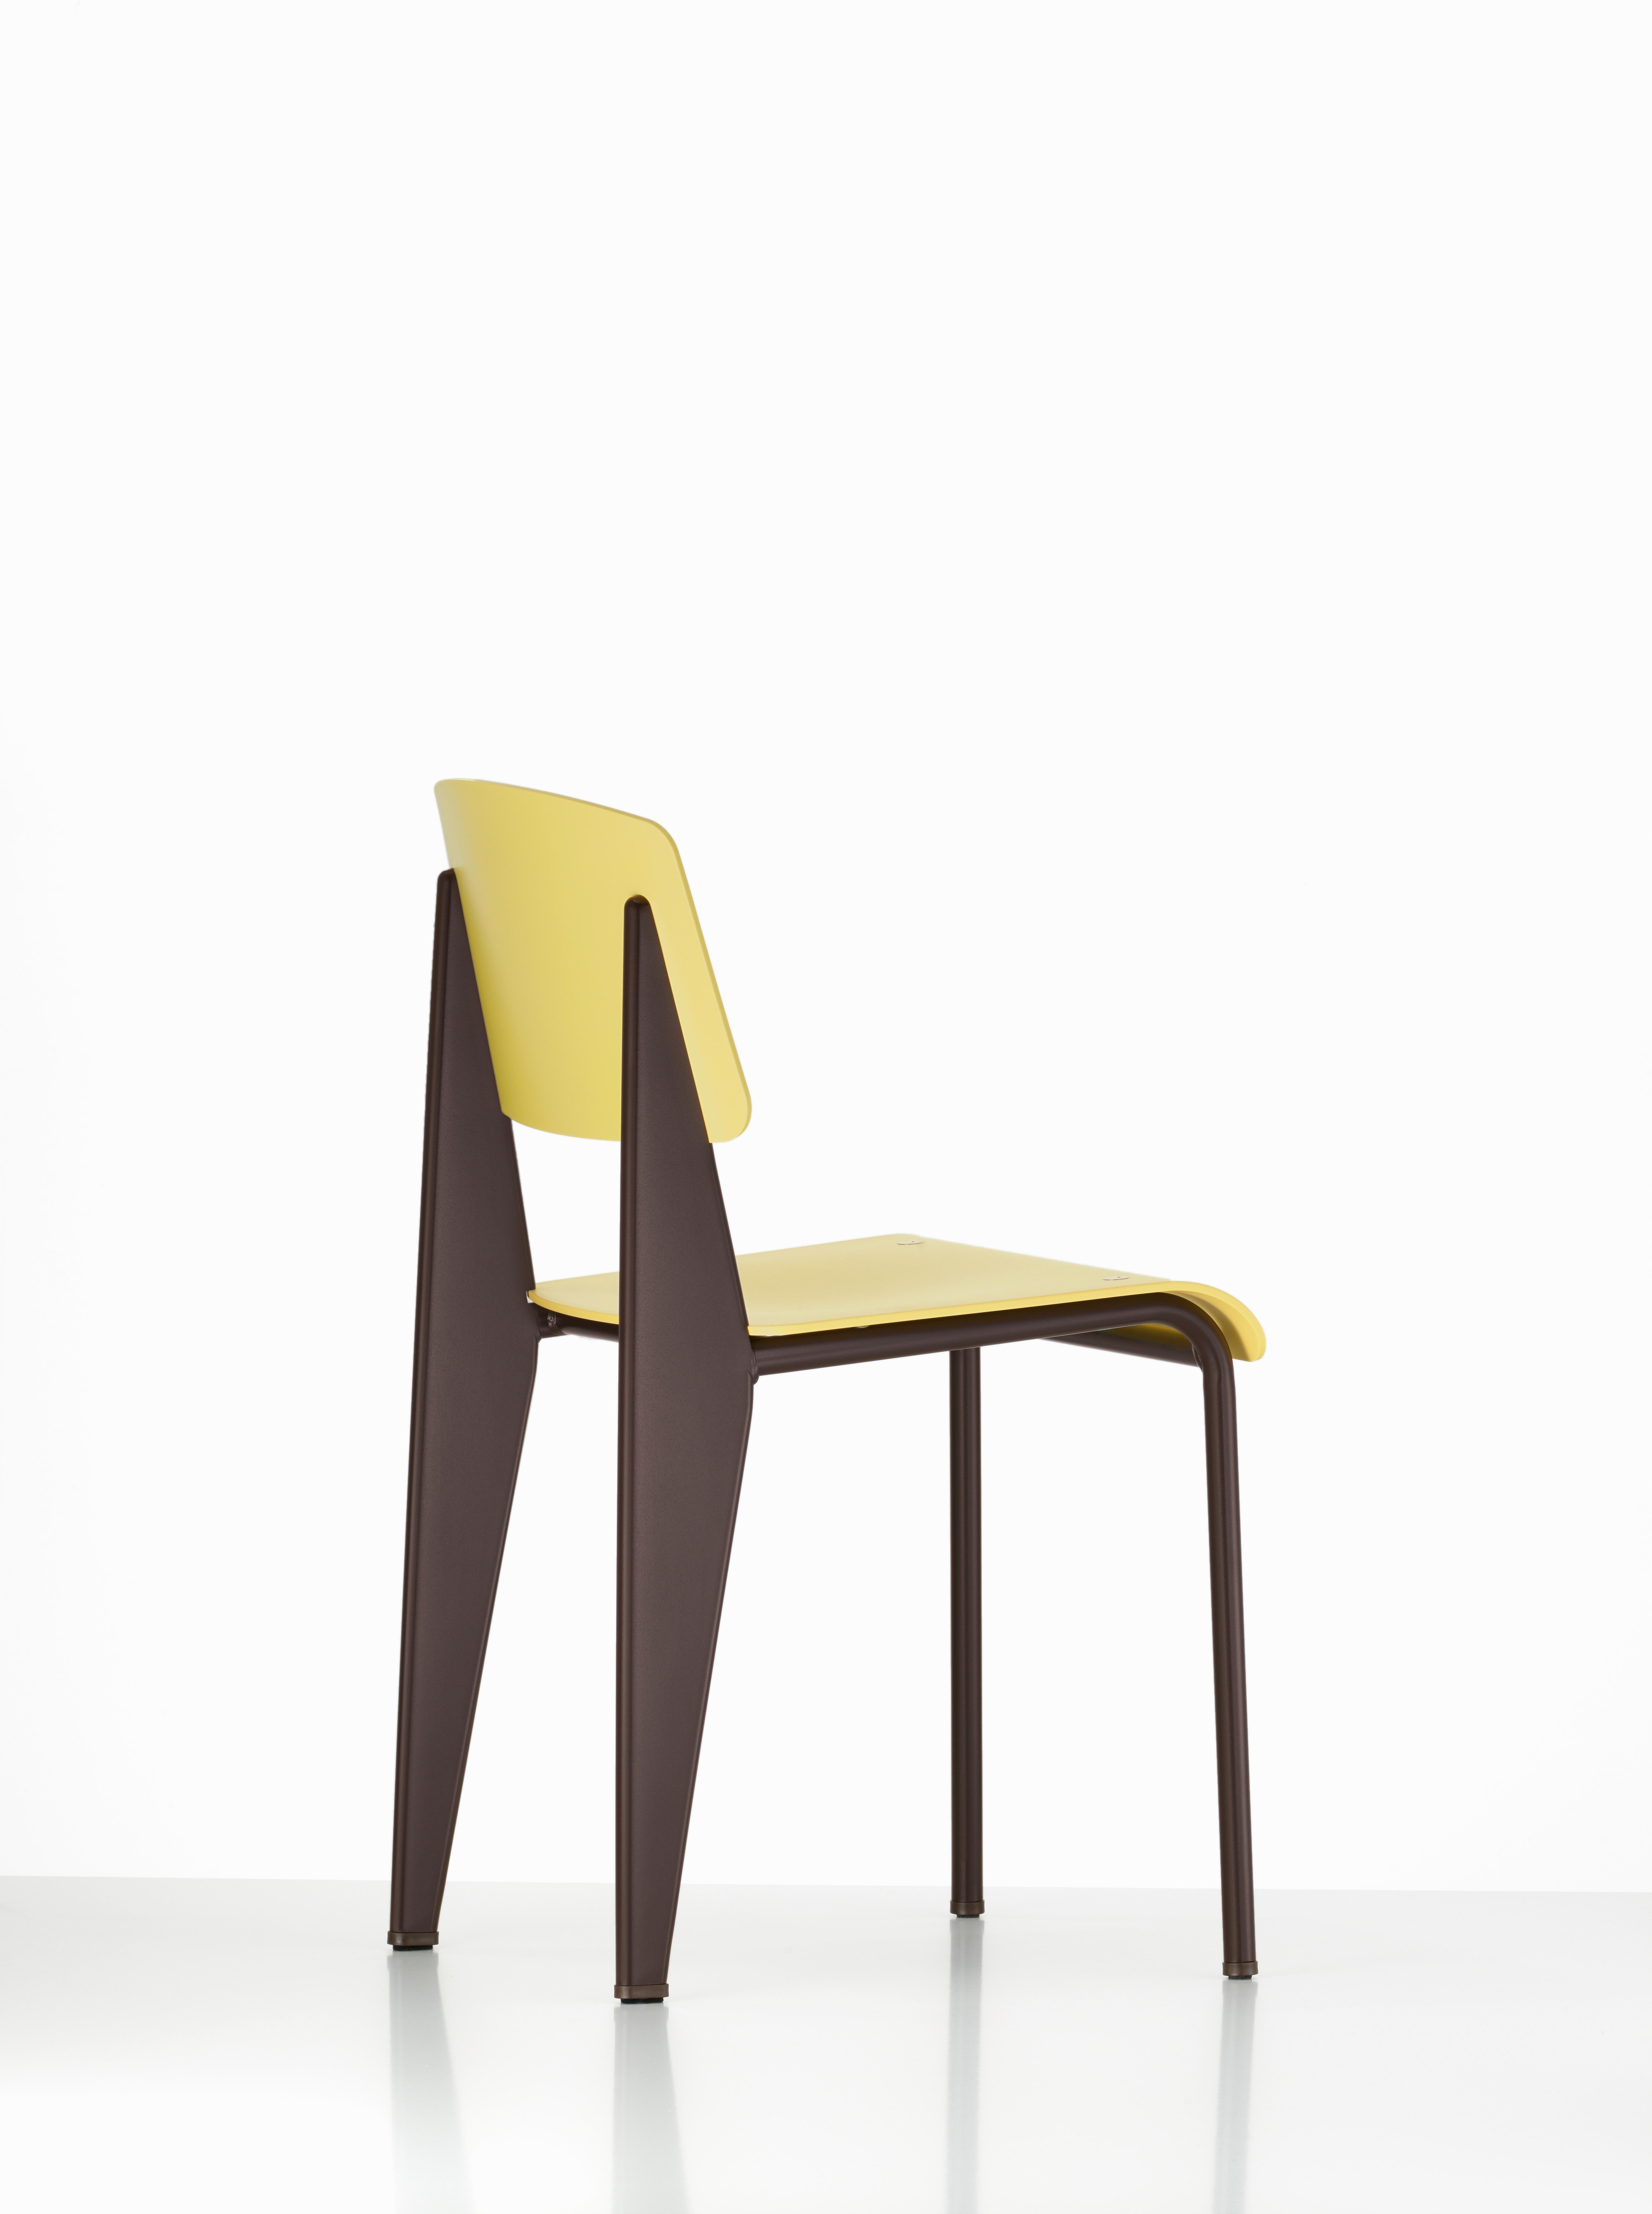 Jean Prouvé Standard Chair SP in Olive and Ecru White for Vitra 5